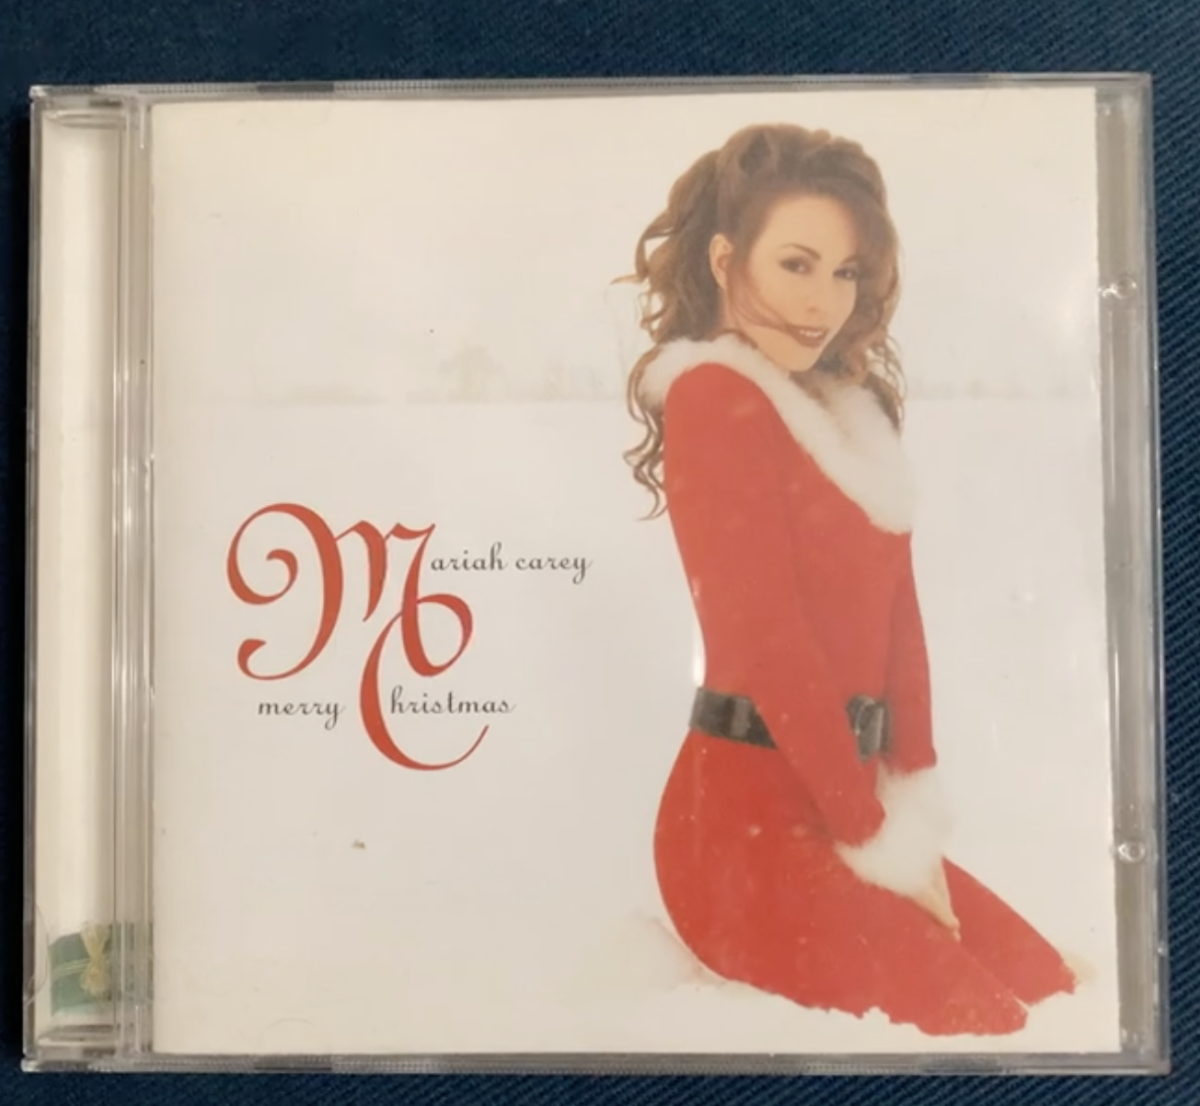 Mariah+Careys+Christmas+album+is+always+a+fan+favorite+during+the+holidays.